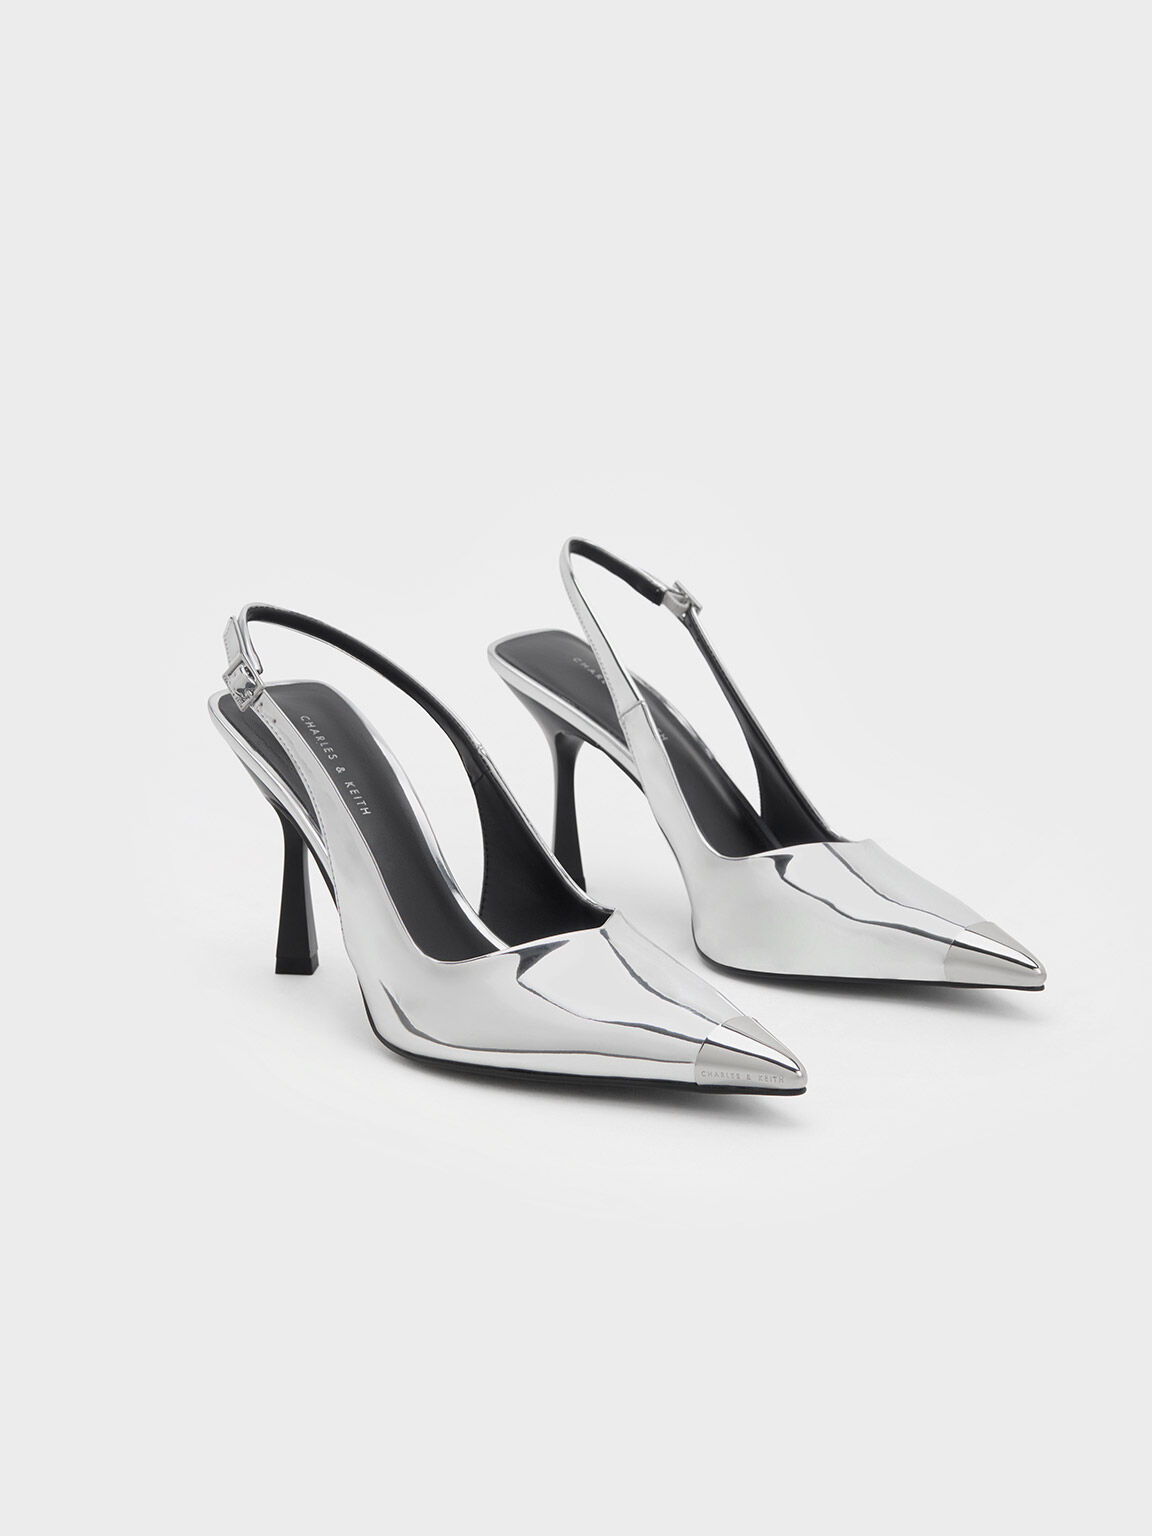 Charles & Keith - Women's Metallic Accent Slingback Pumps, White, US 5